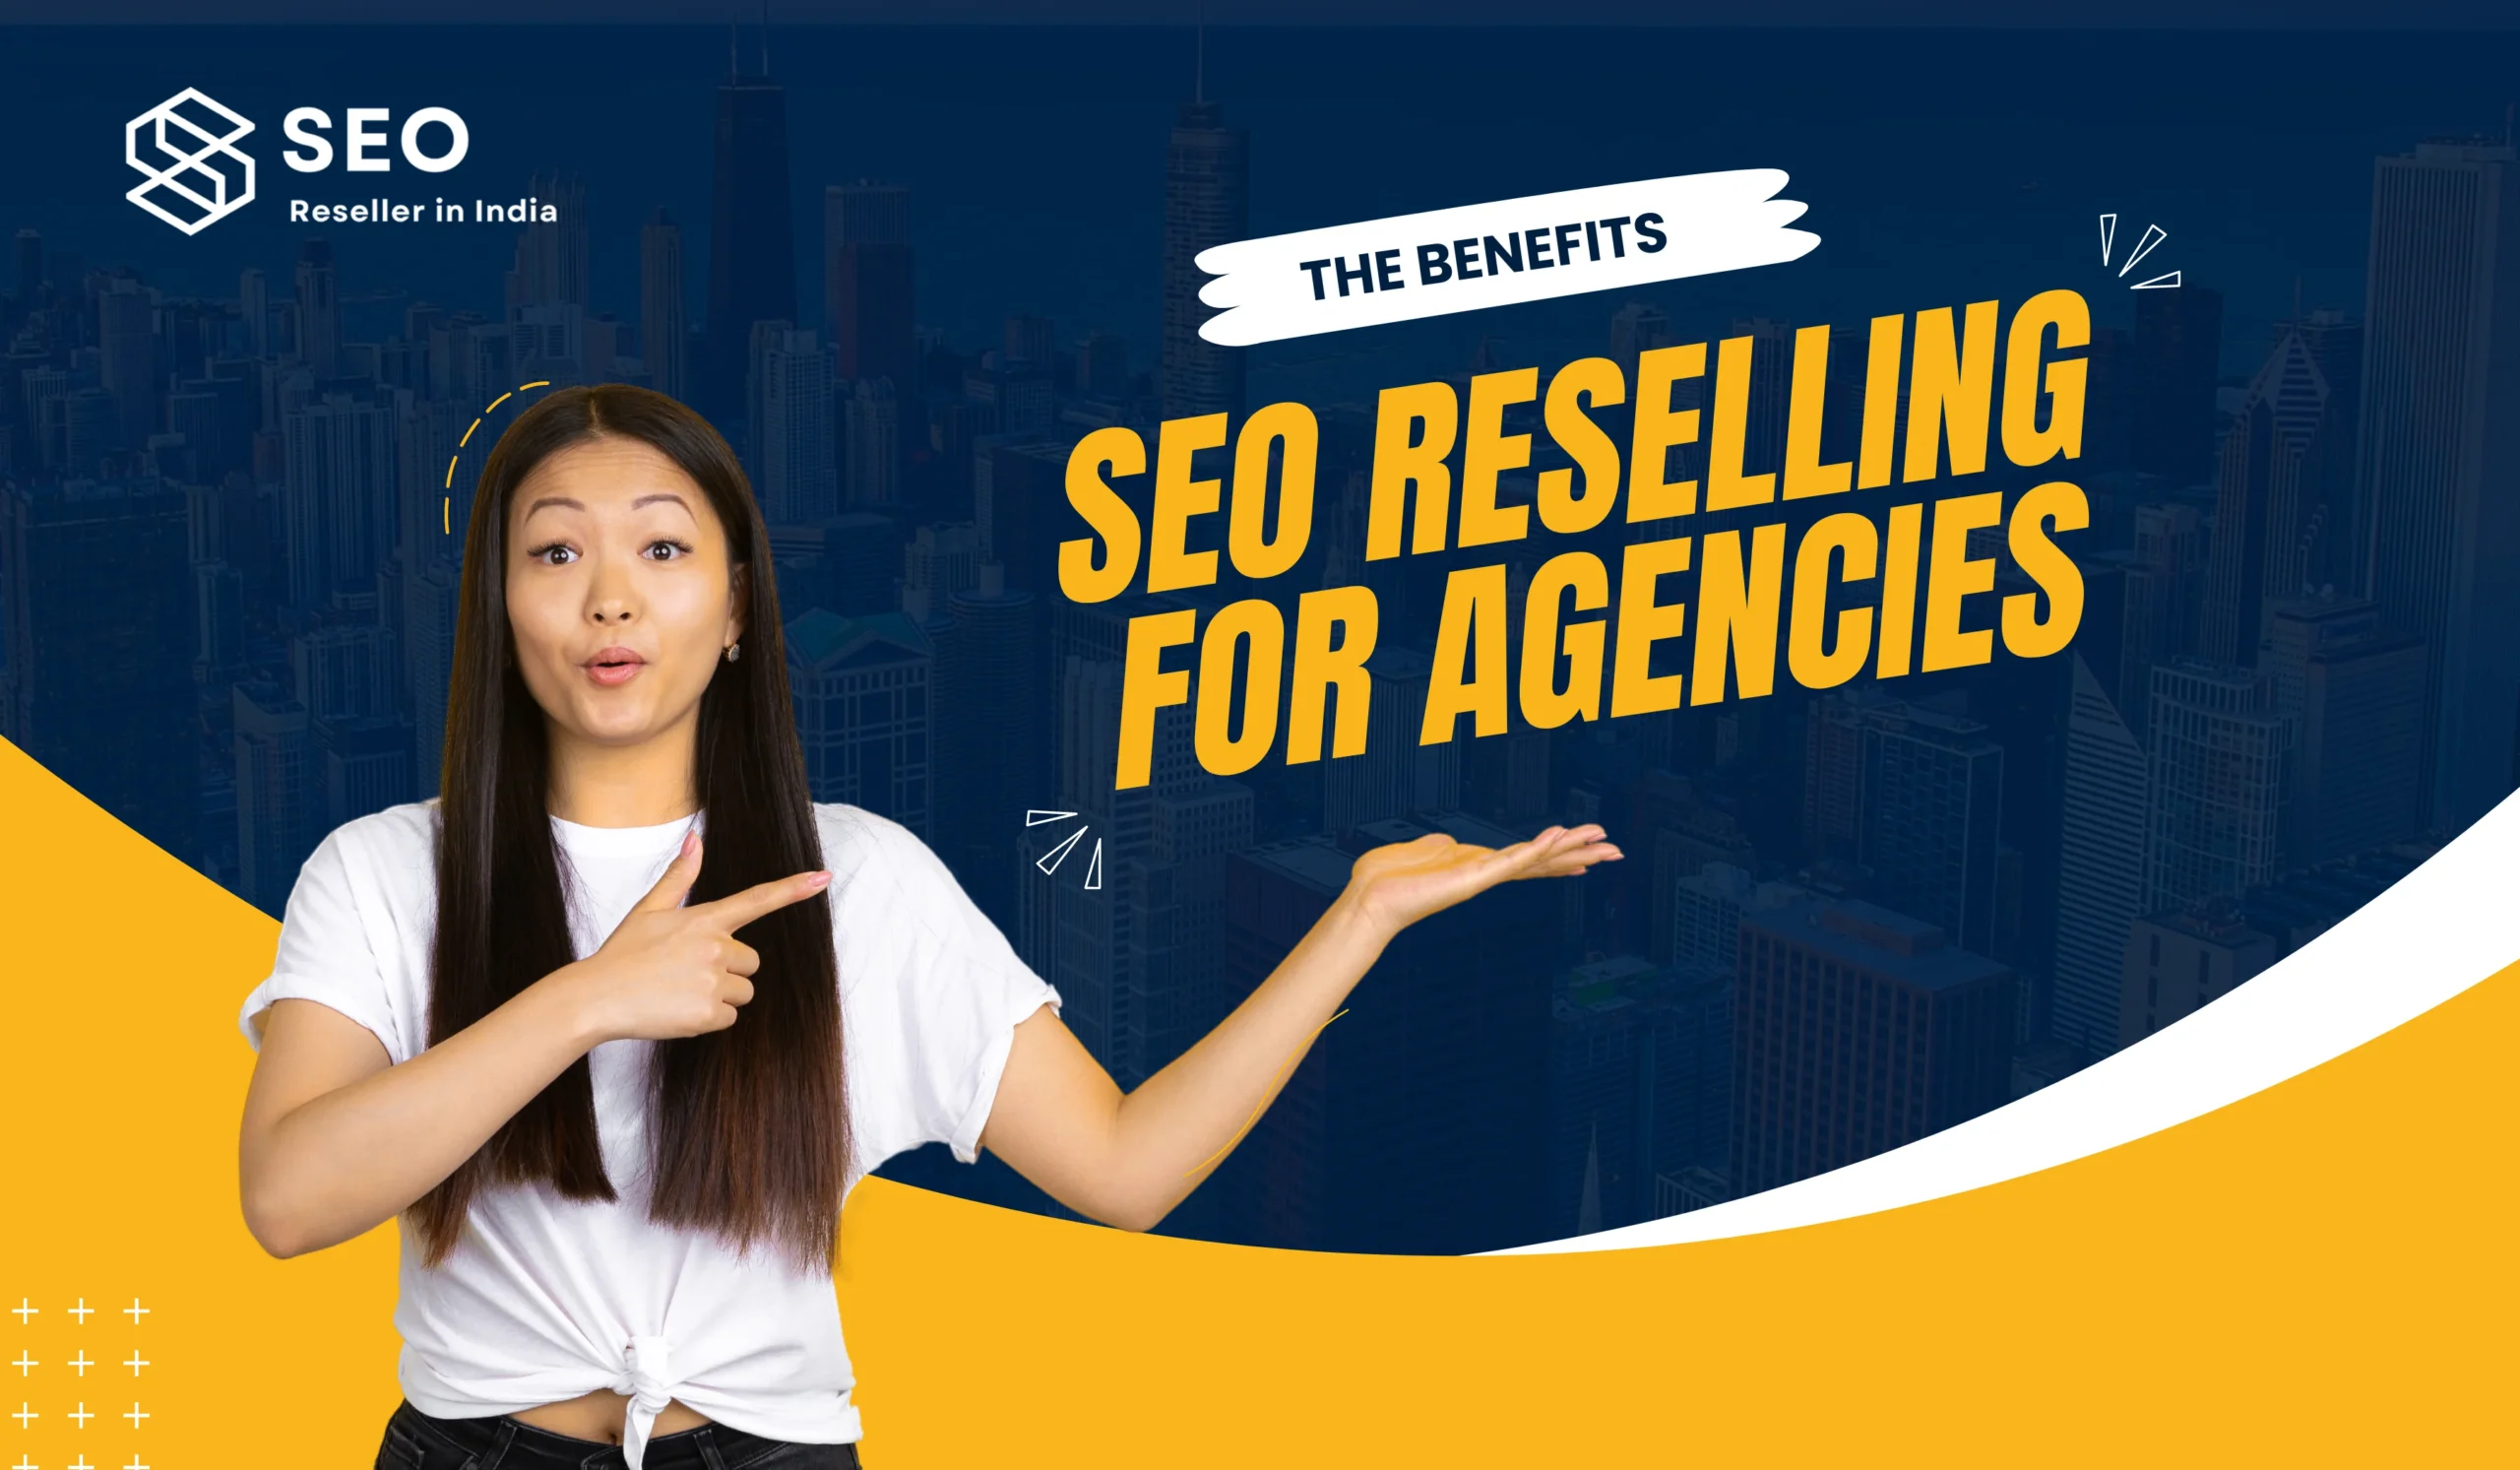 SEO Reselling for Agencies